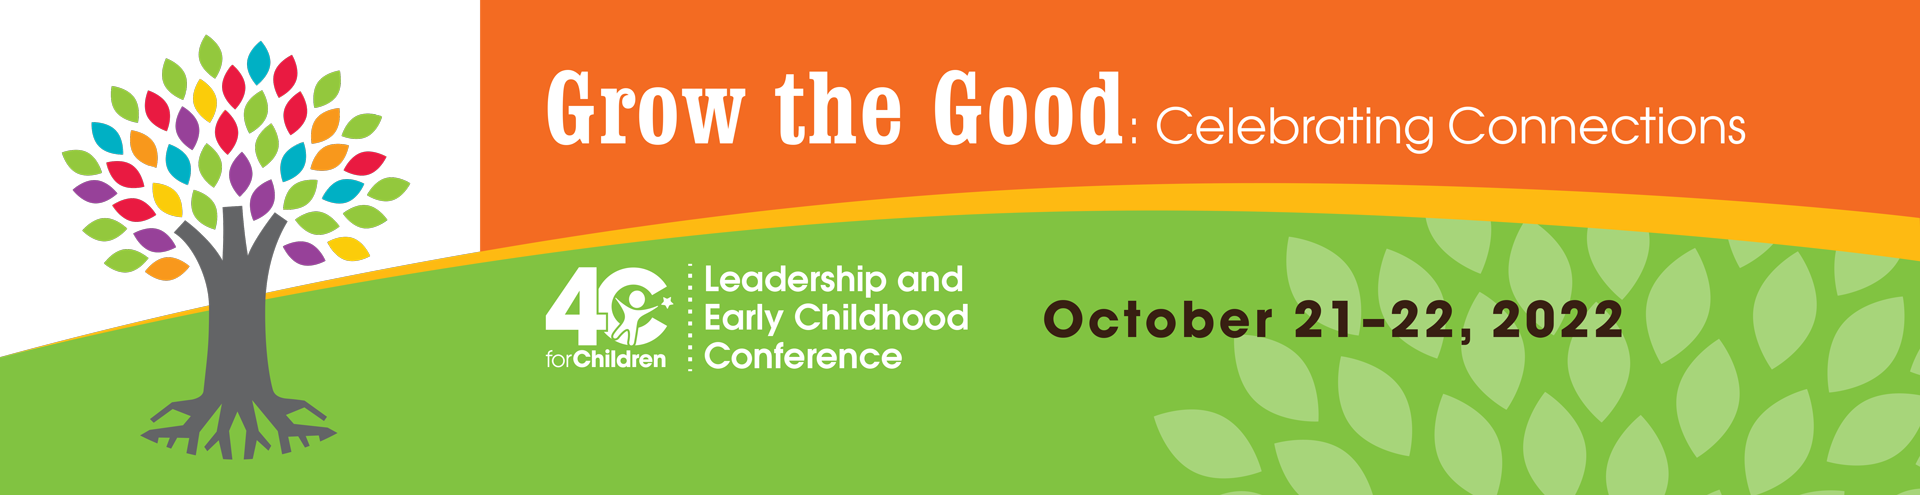 Grow the Good: Celebrating Connections, October 21-22, 2022